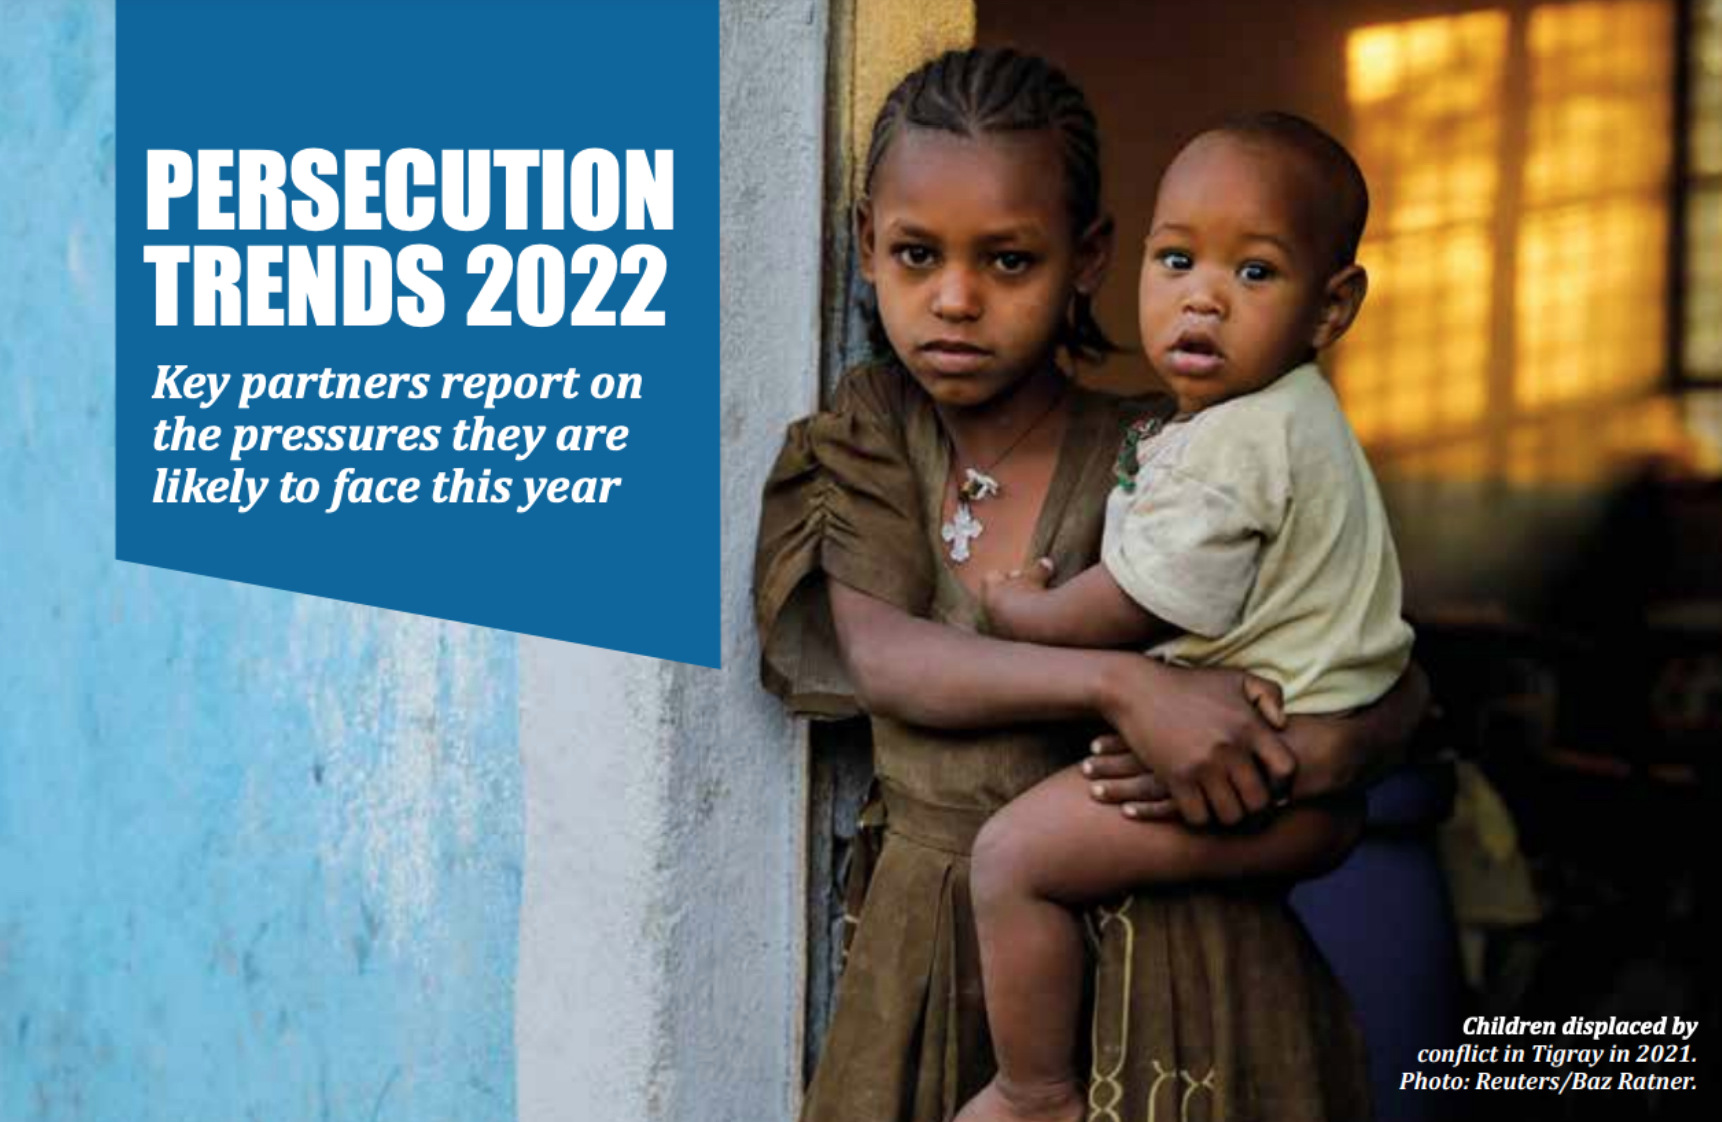 Persecution Trends report 2022